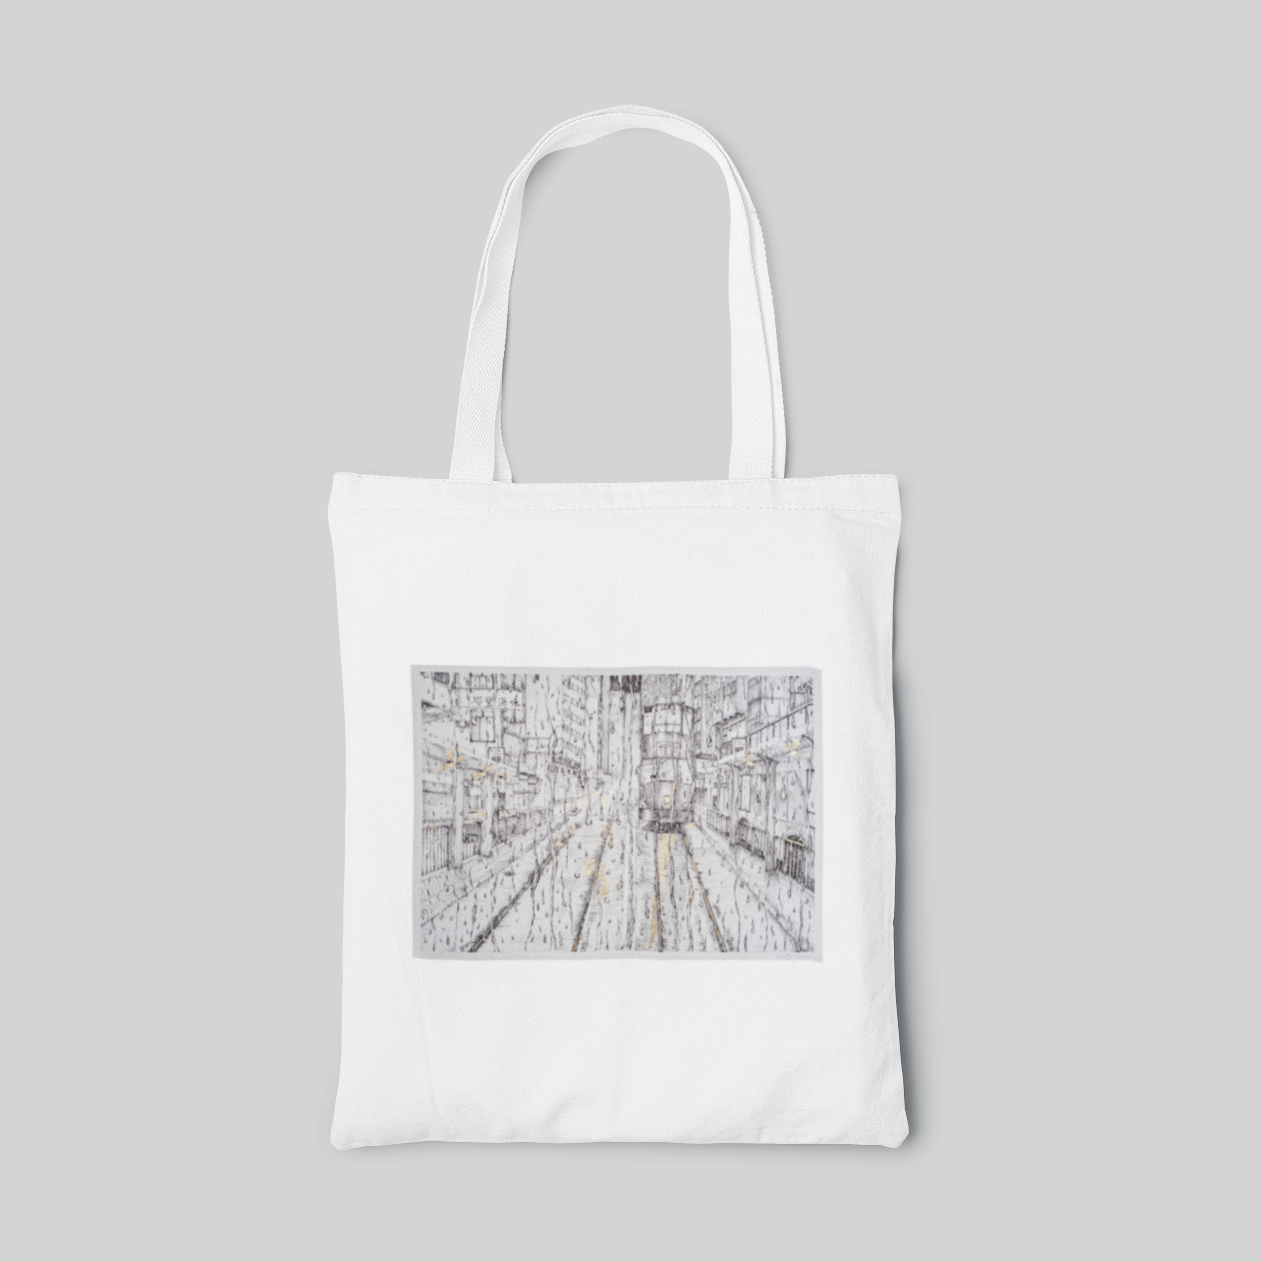 White urban sketch designed tote bag with monochrome line drawings of Hong Kong city, front side